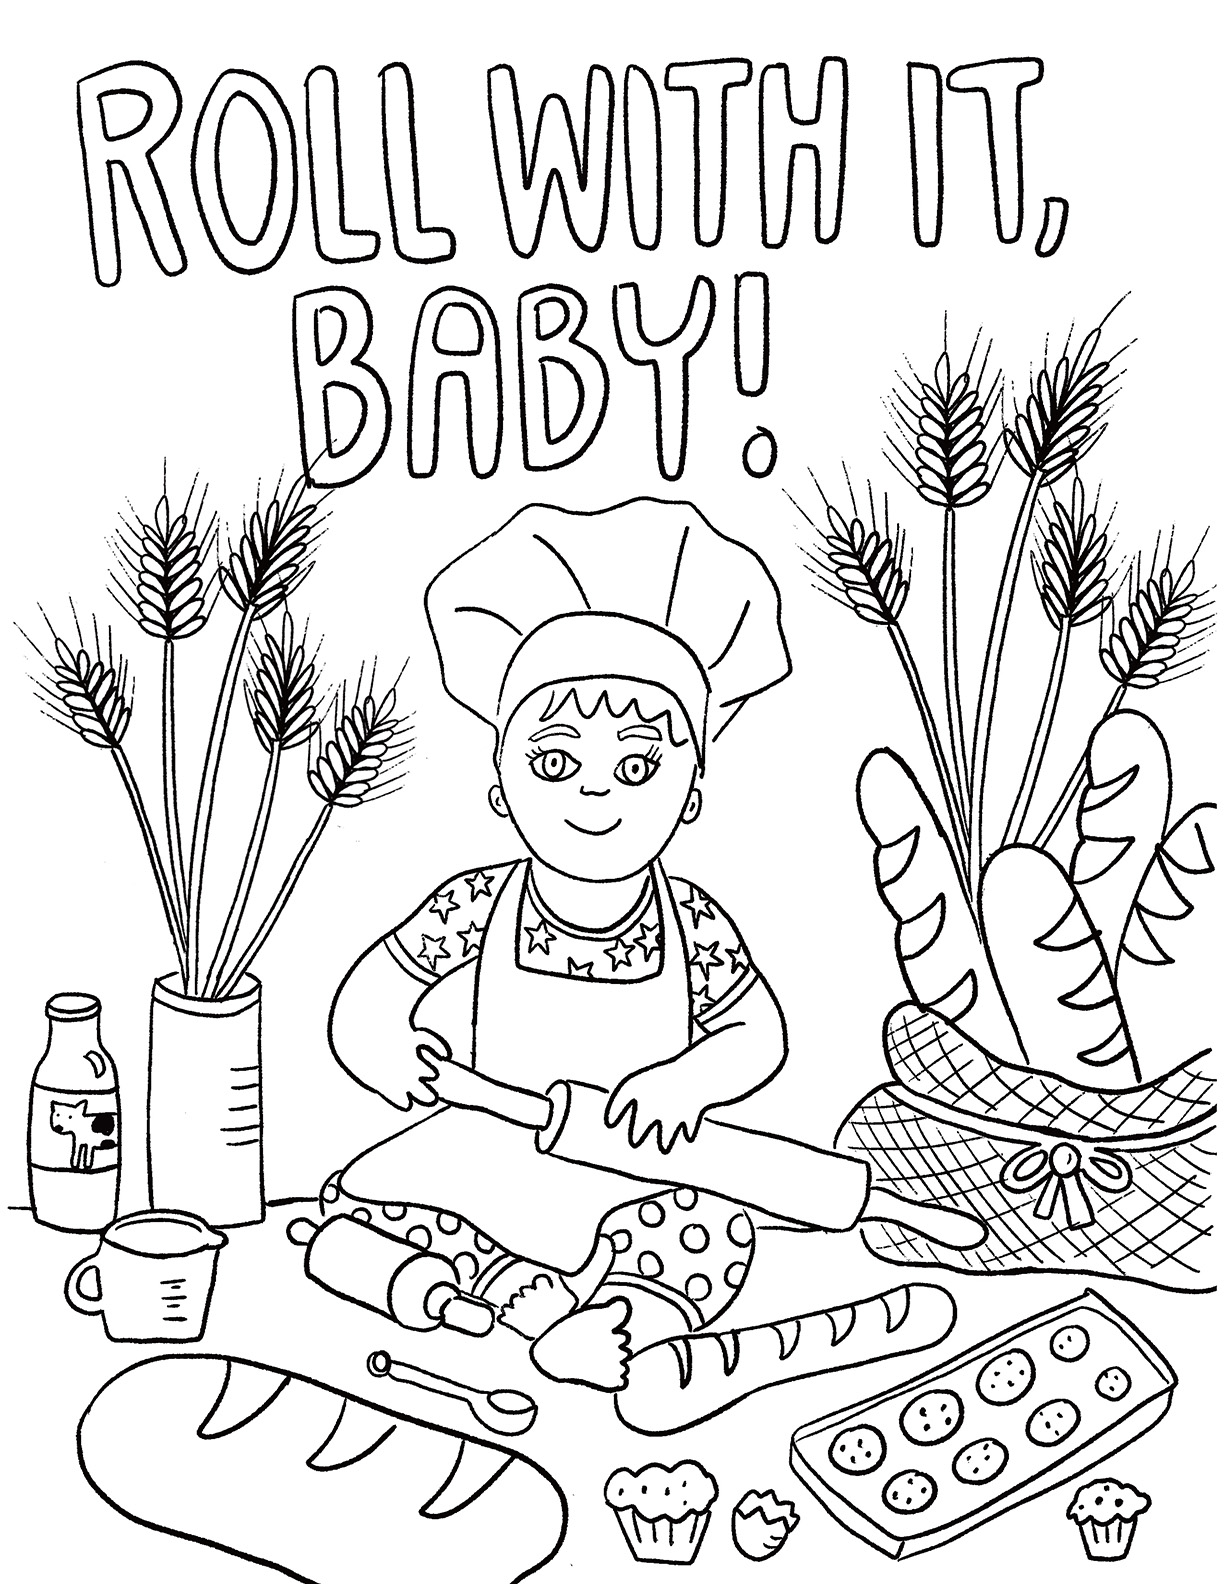 Printable Coloring Pages | August First Bakery